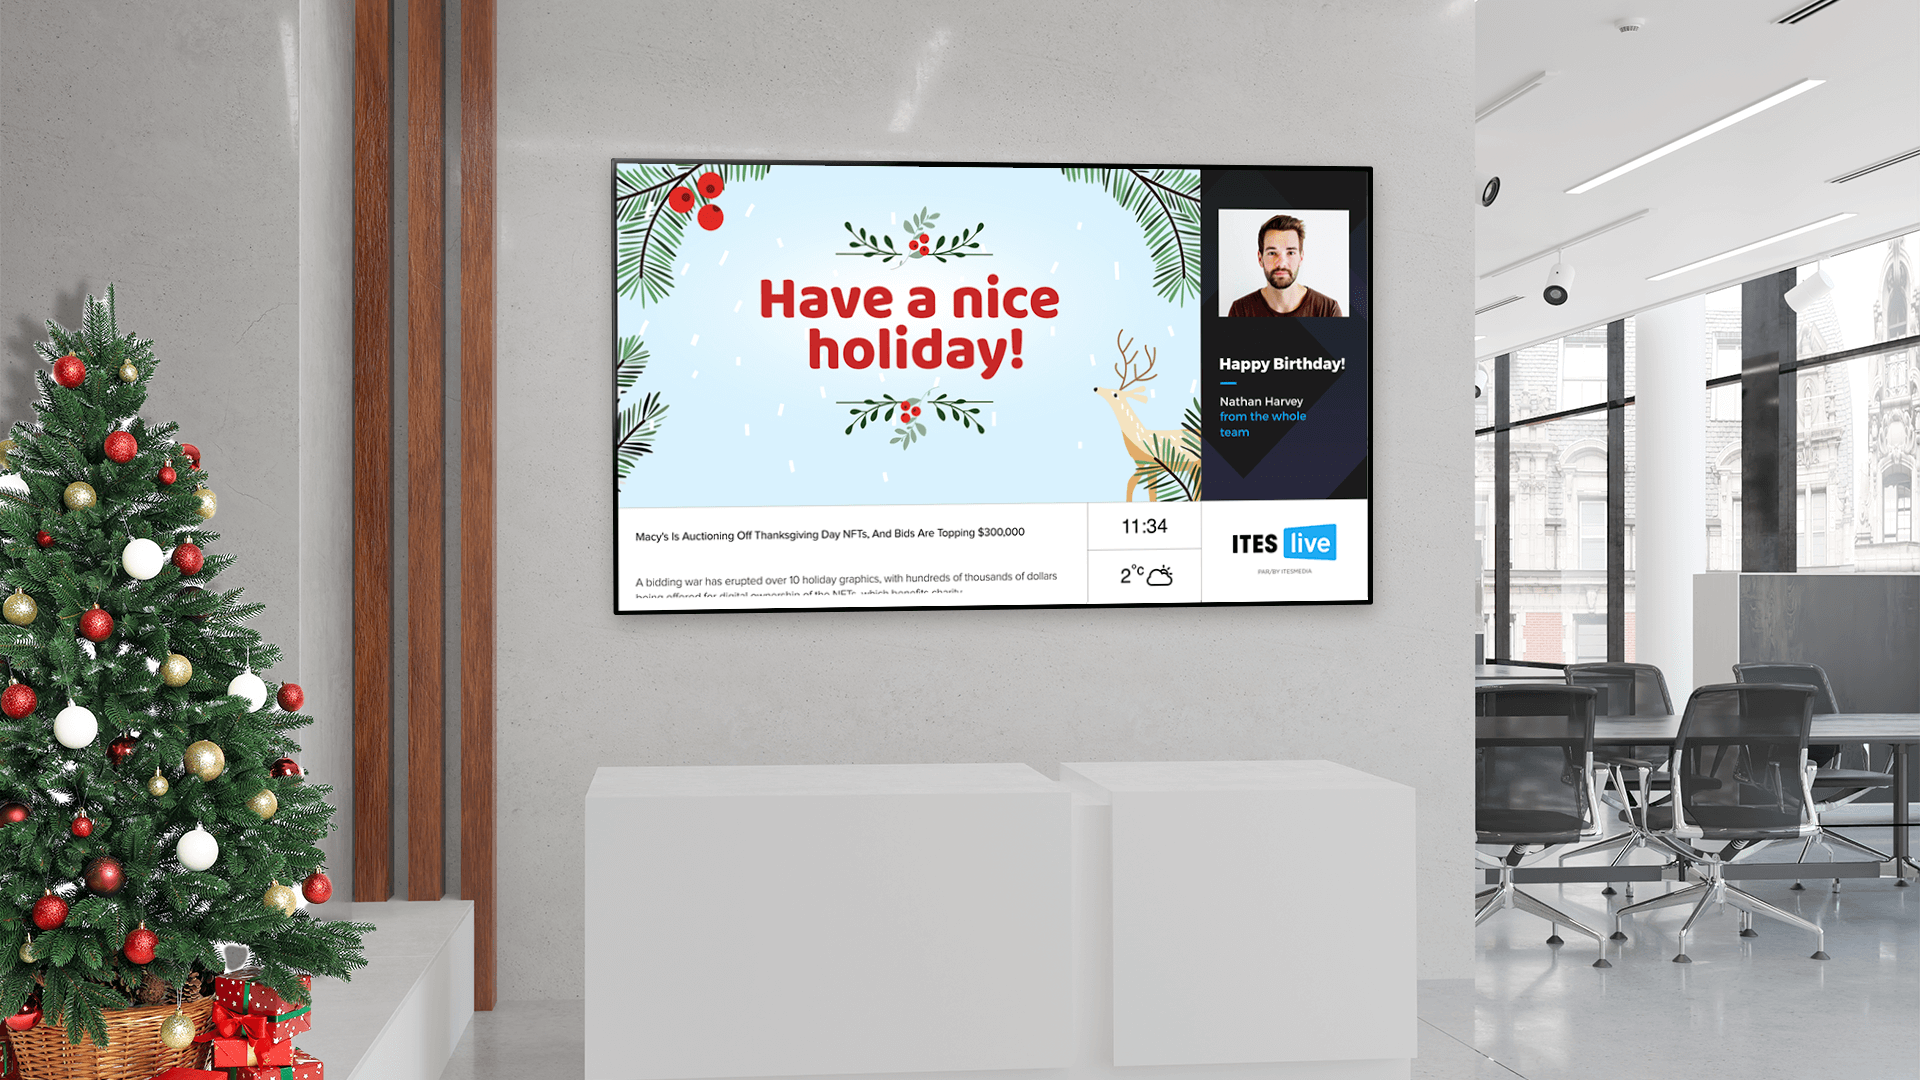 Digital signage content for the holidays